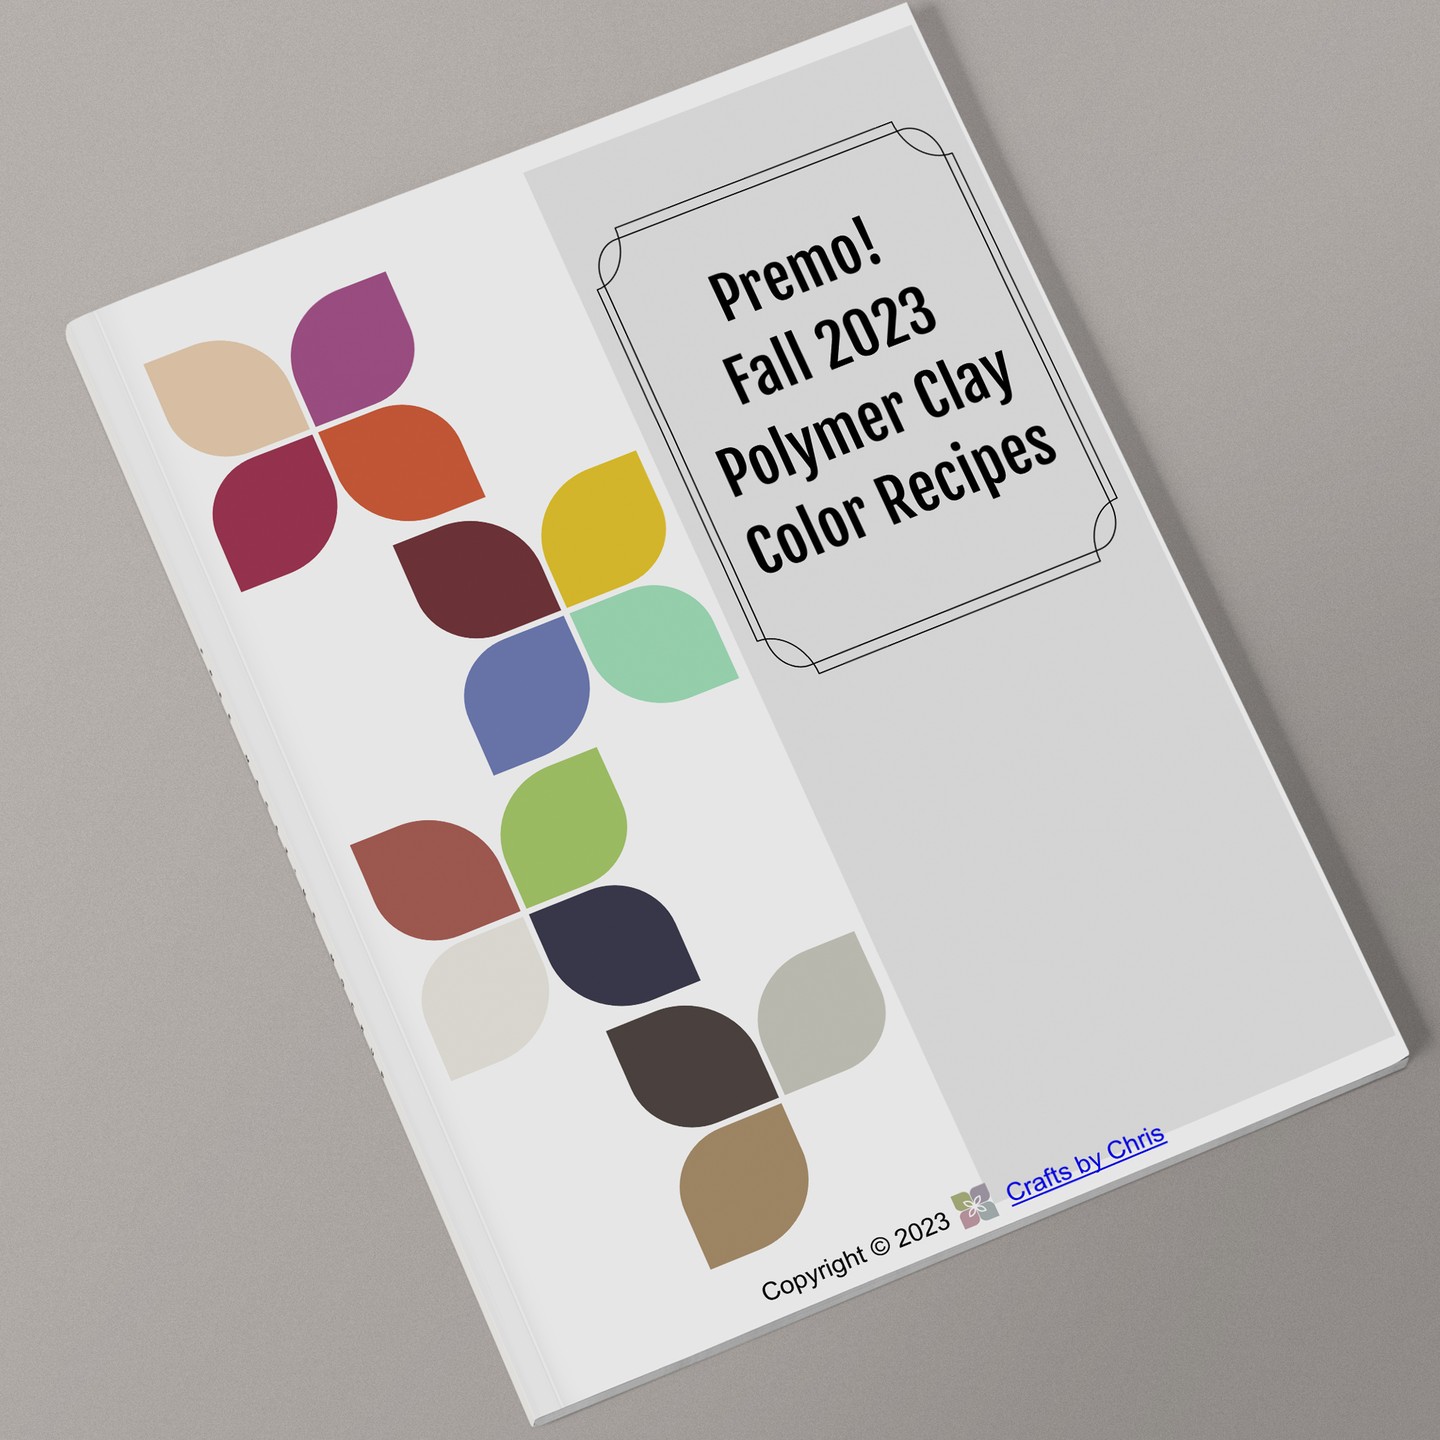 Premo Fall 2023 color recipes are now available. Link in bio

#polymerclaycolorrecipes #polymerclaycolormixing #polymerc